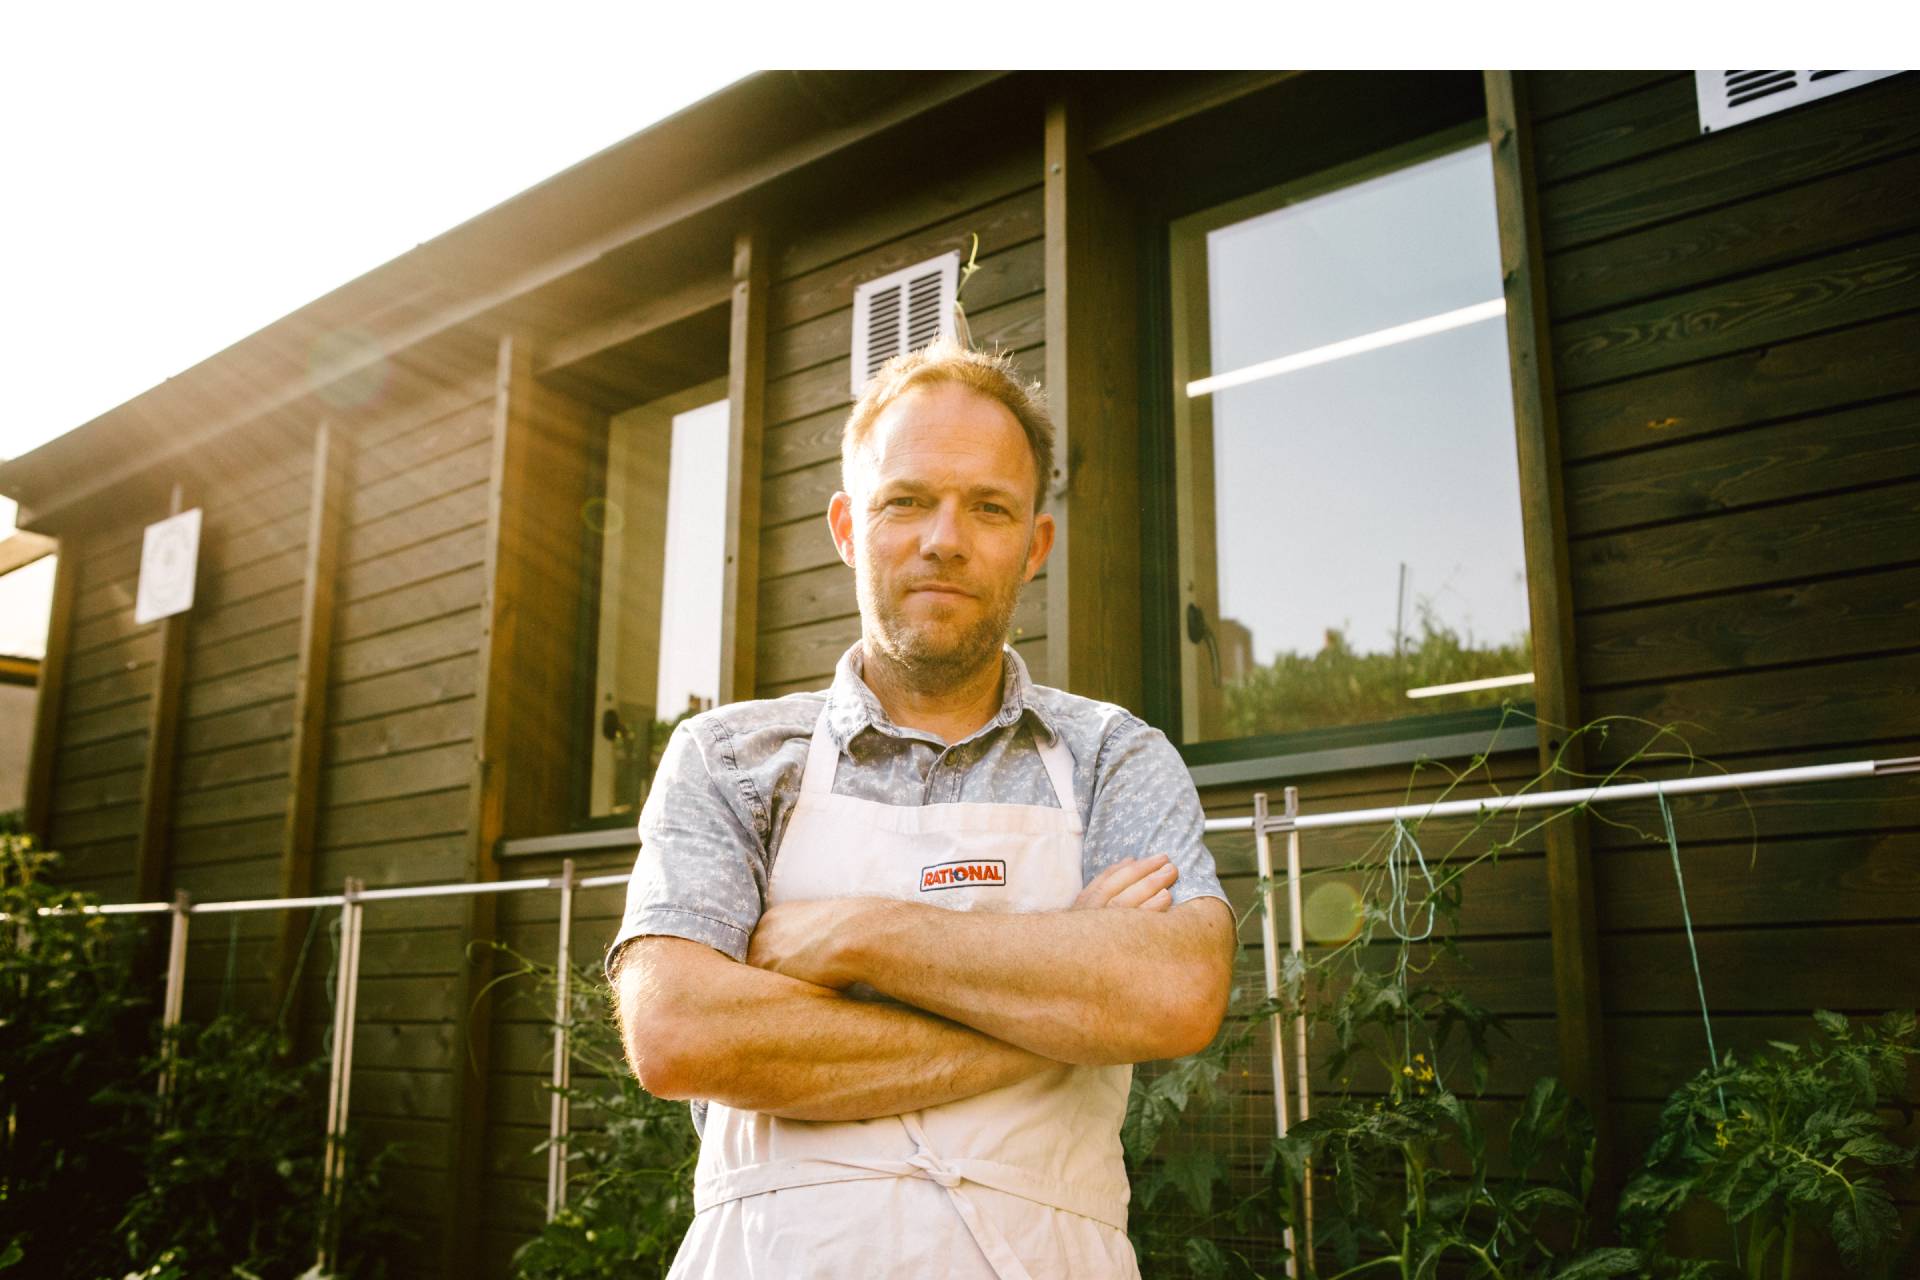 A white man wearing an apron and folded arms stands outside in the sunshine